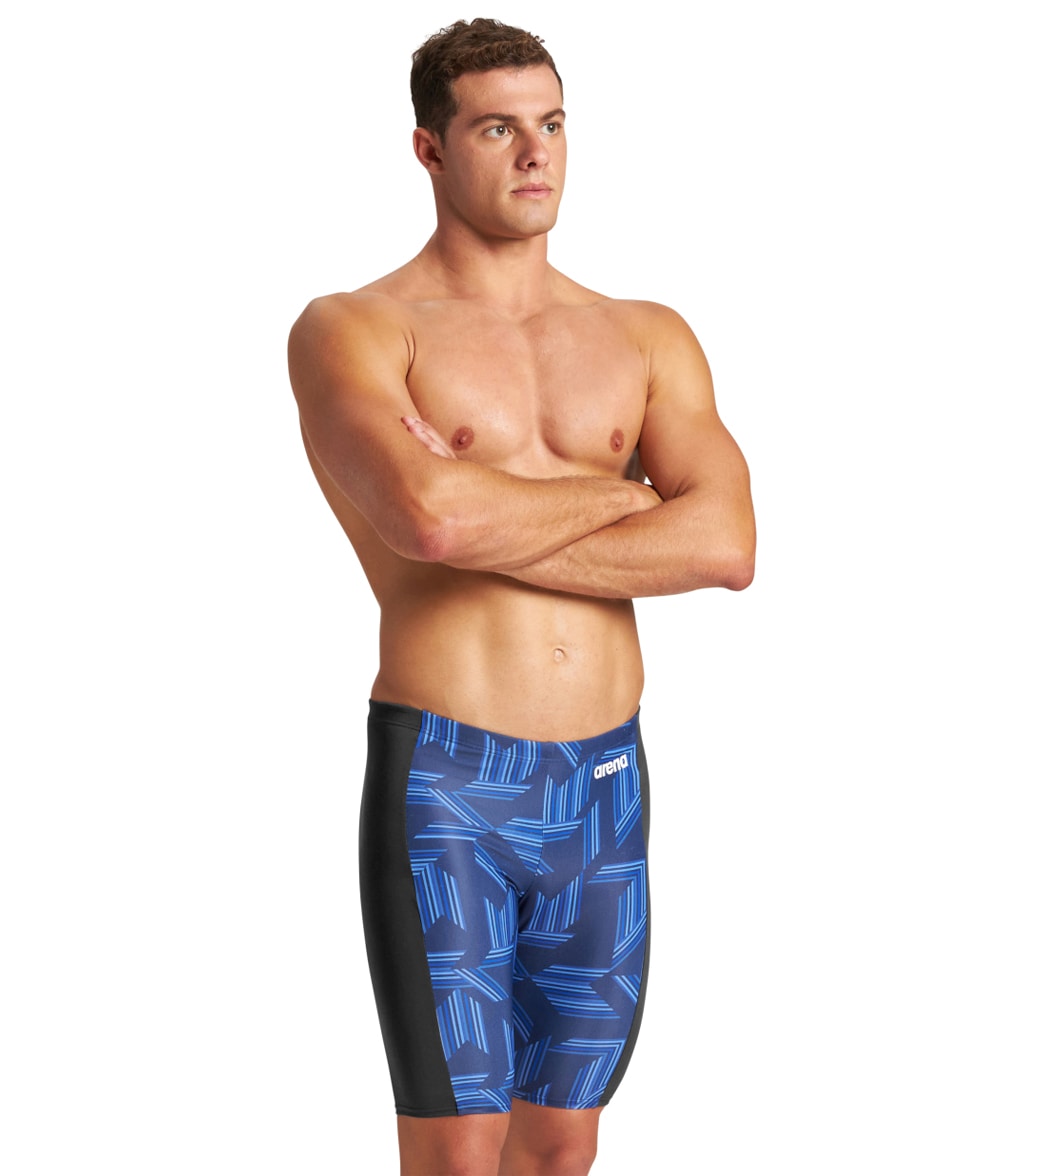 Arena Men's Puzzled Jammer Swimsuit - Black/Navy/Multi 24 Polyester - Swimoutlet.com